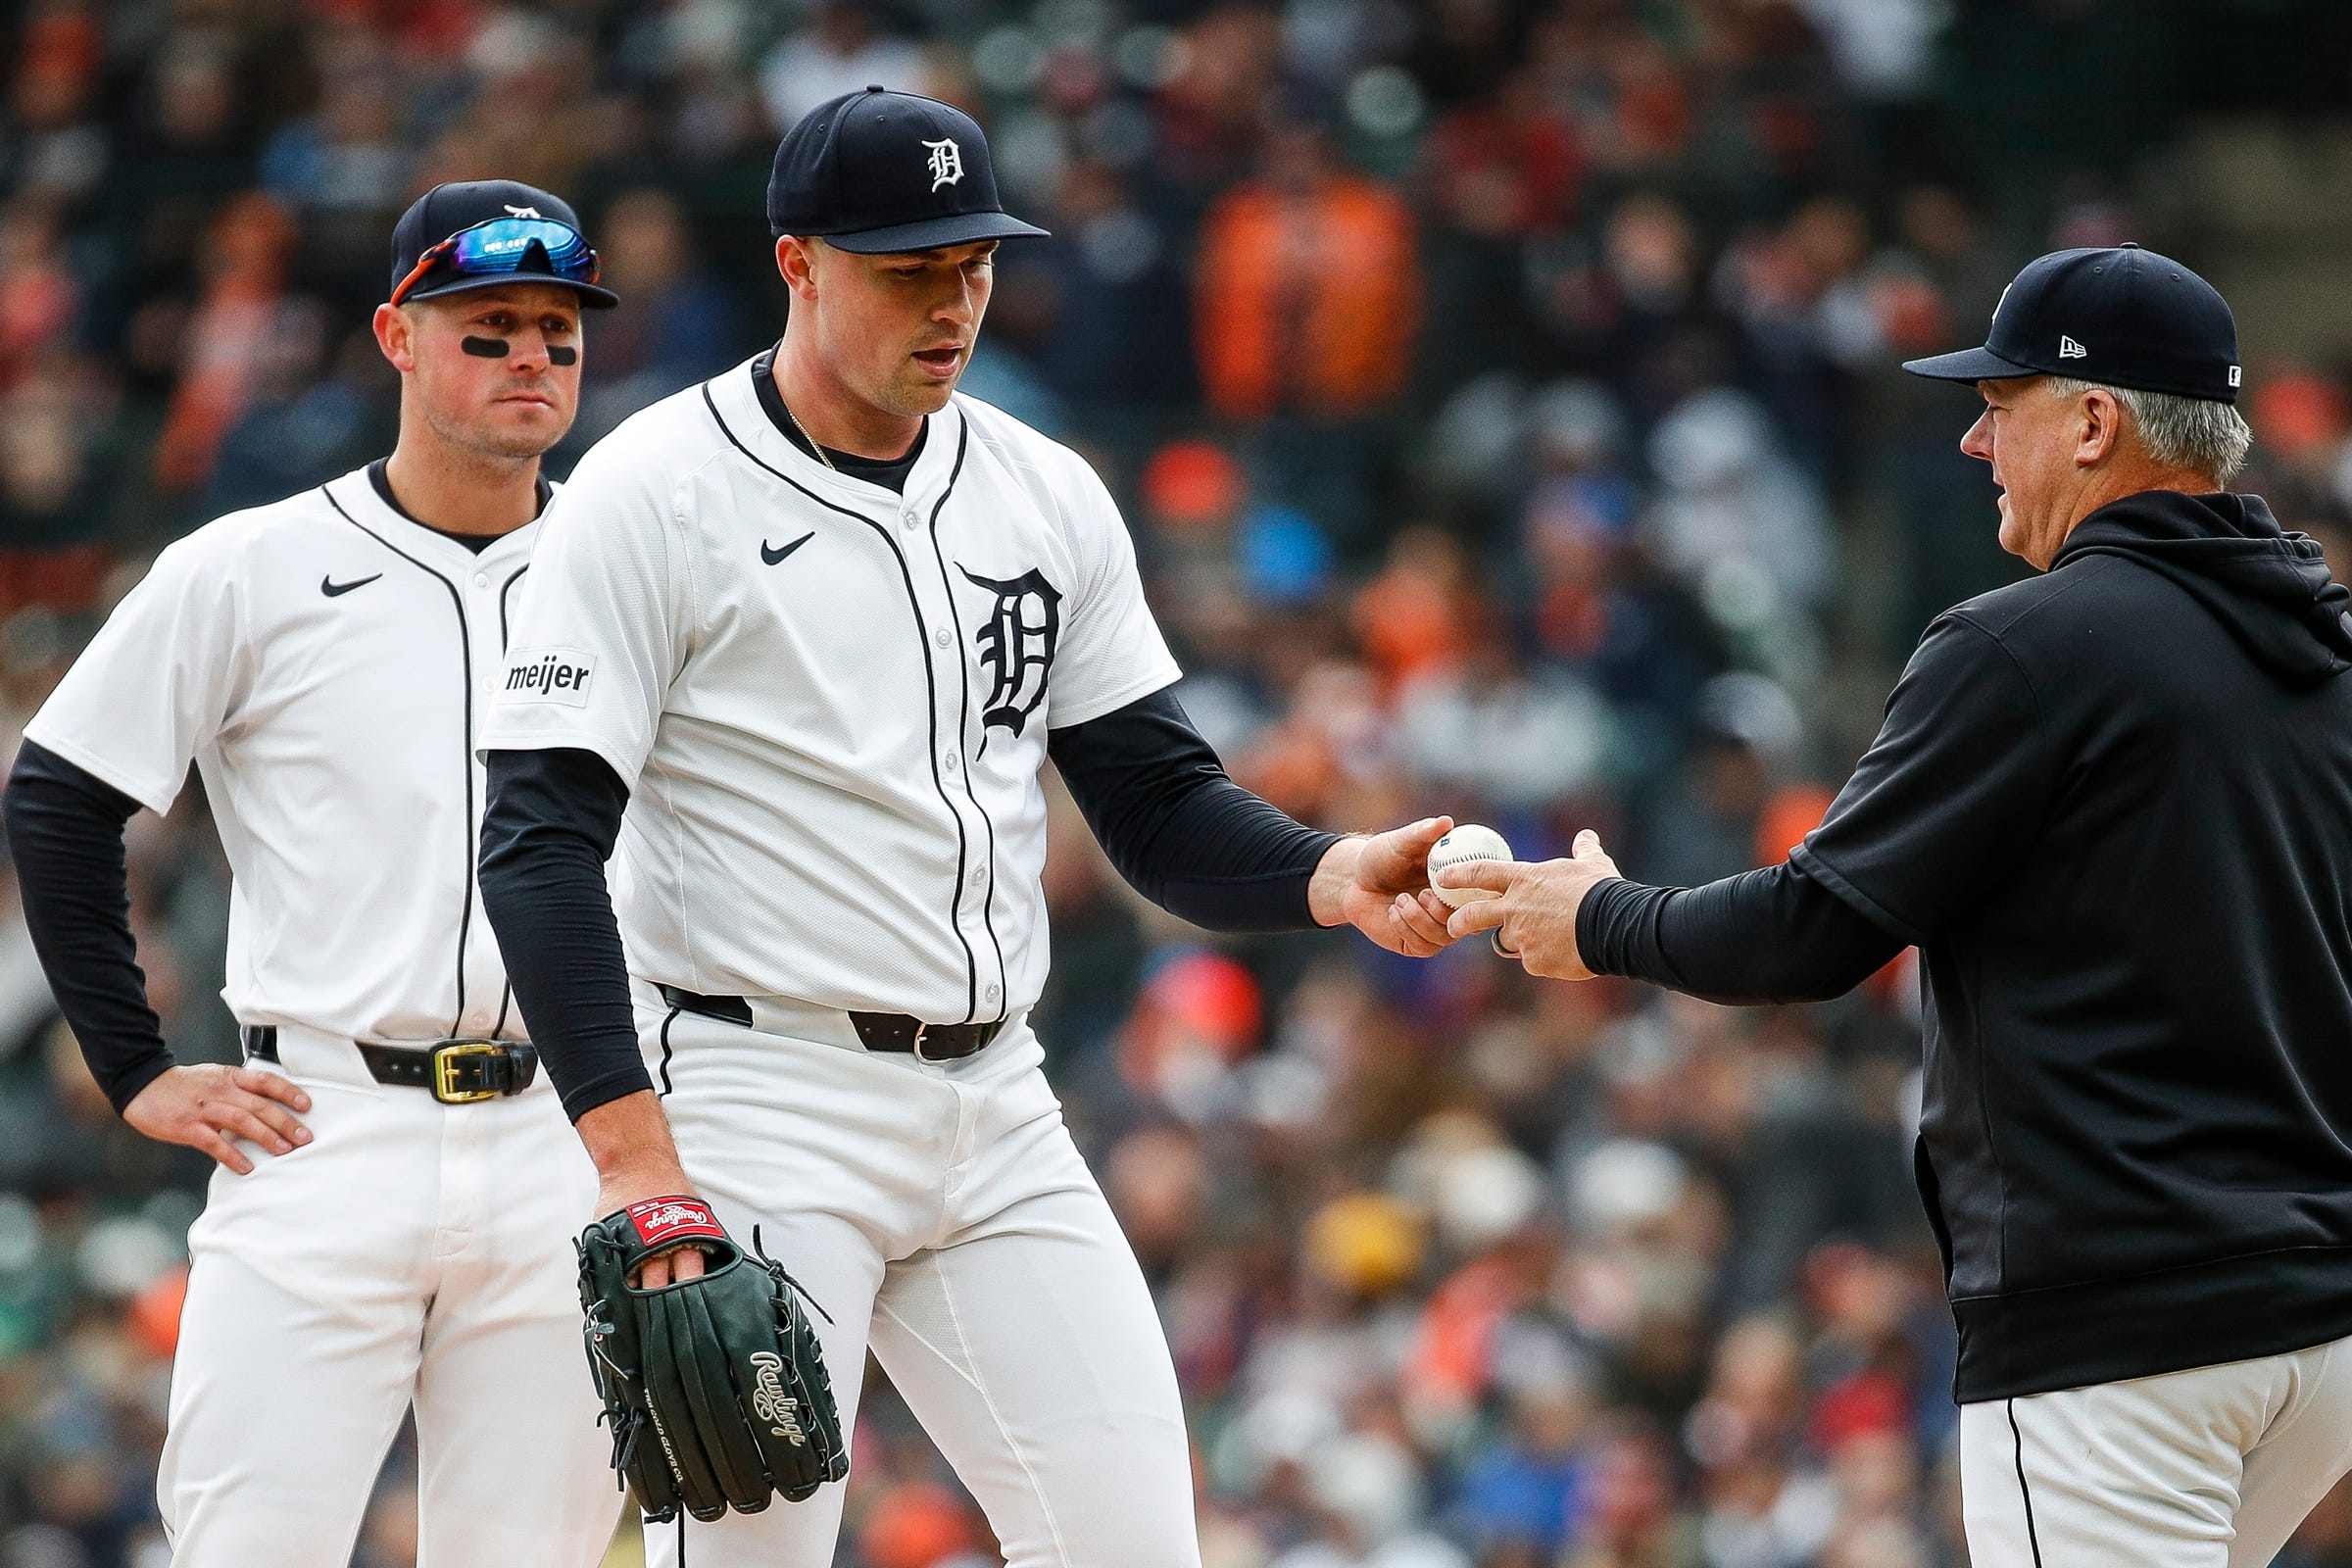 Tigers Breakout Pitcher Makes Franchise History Against the Yankees